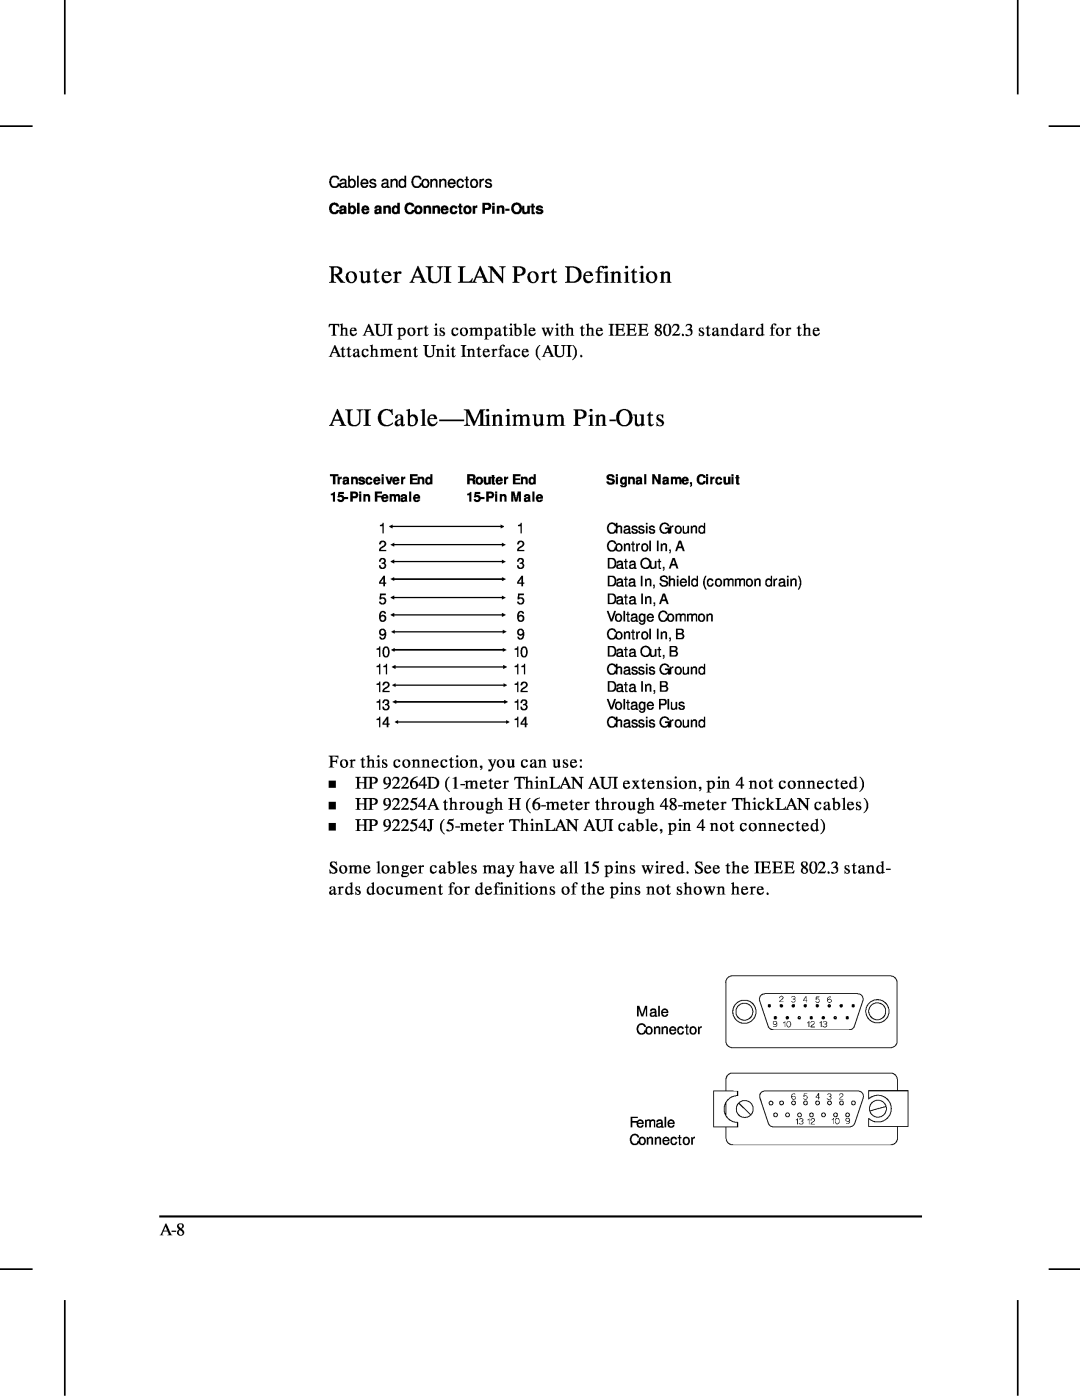 HP 480 manual Router AUI LAN Port Definition, AUI Cable-Minimum Pin-Outs, Cable and Connector Pin-Outs 